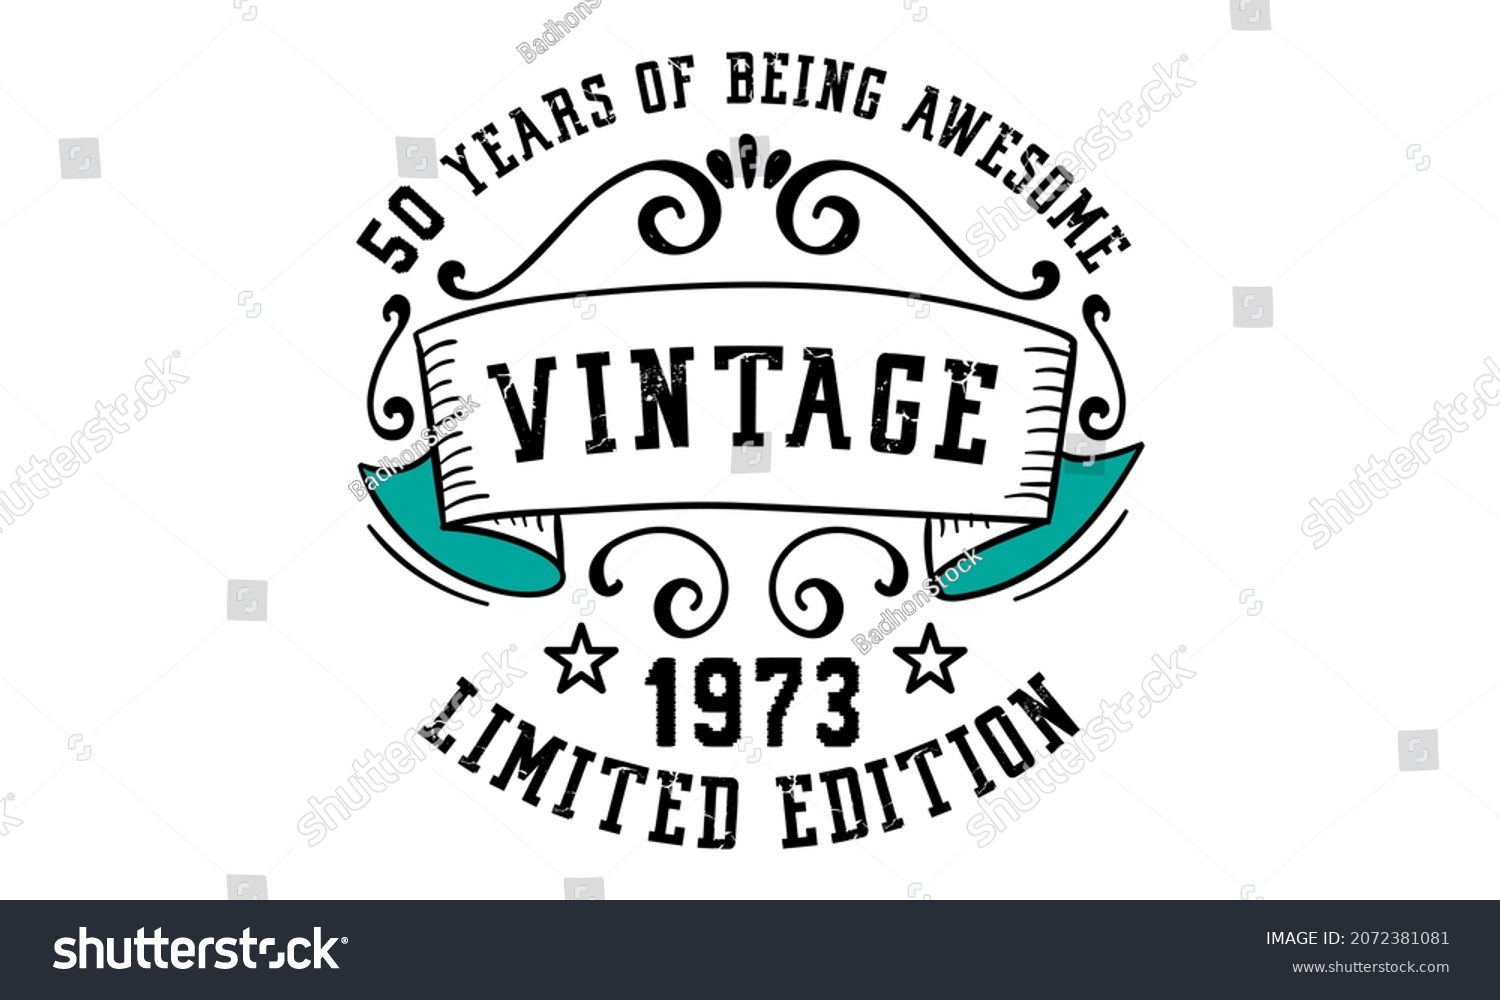 SVG of 50 Years of Being Awesome Vintage Limited Edition 1973 Graphic. It's able to print on T-shirt, mug, sticker, gift card, hoodie, wallpaper, hat and much more. svg